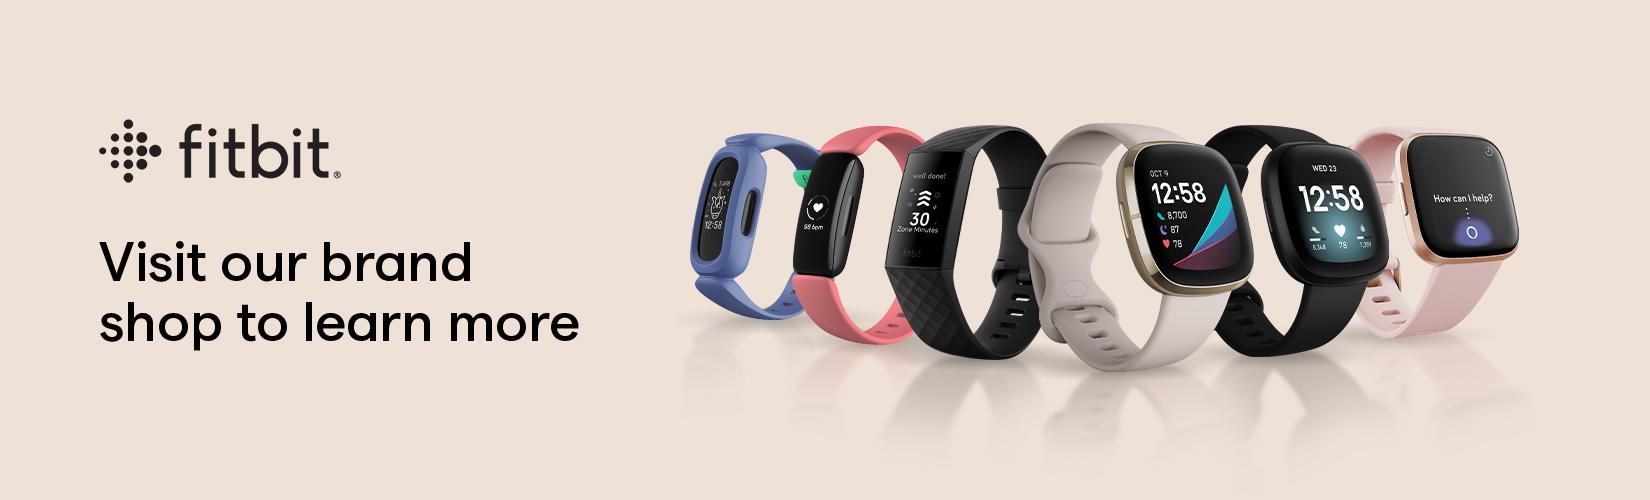 Fitbit. Visit our brand shop to learn more.